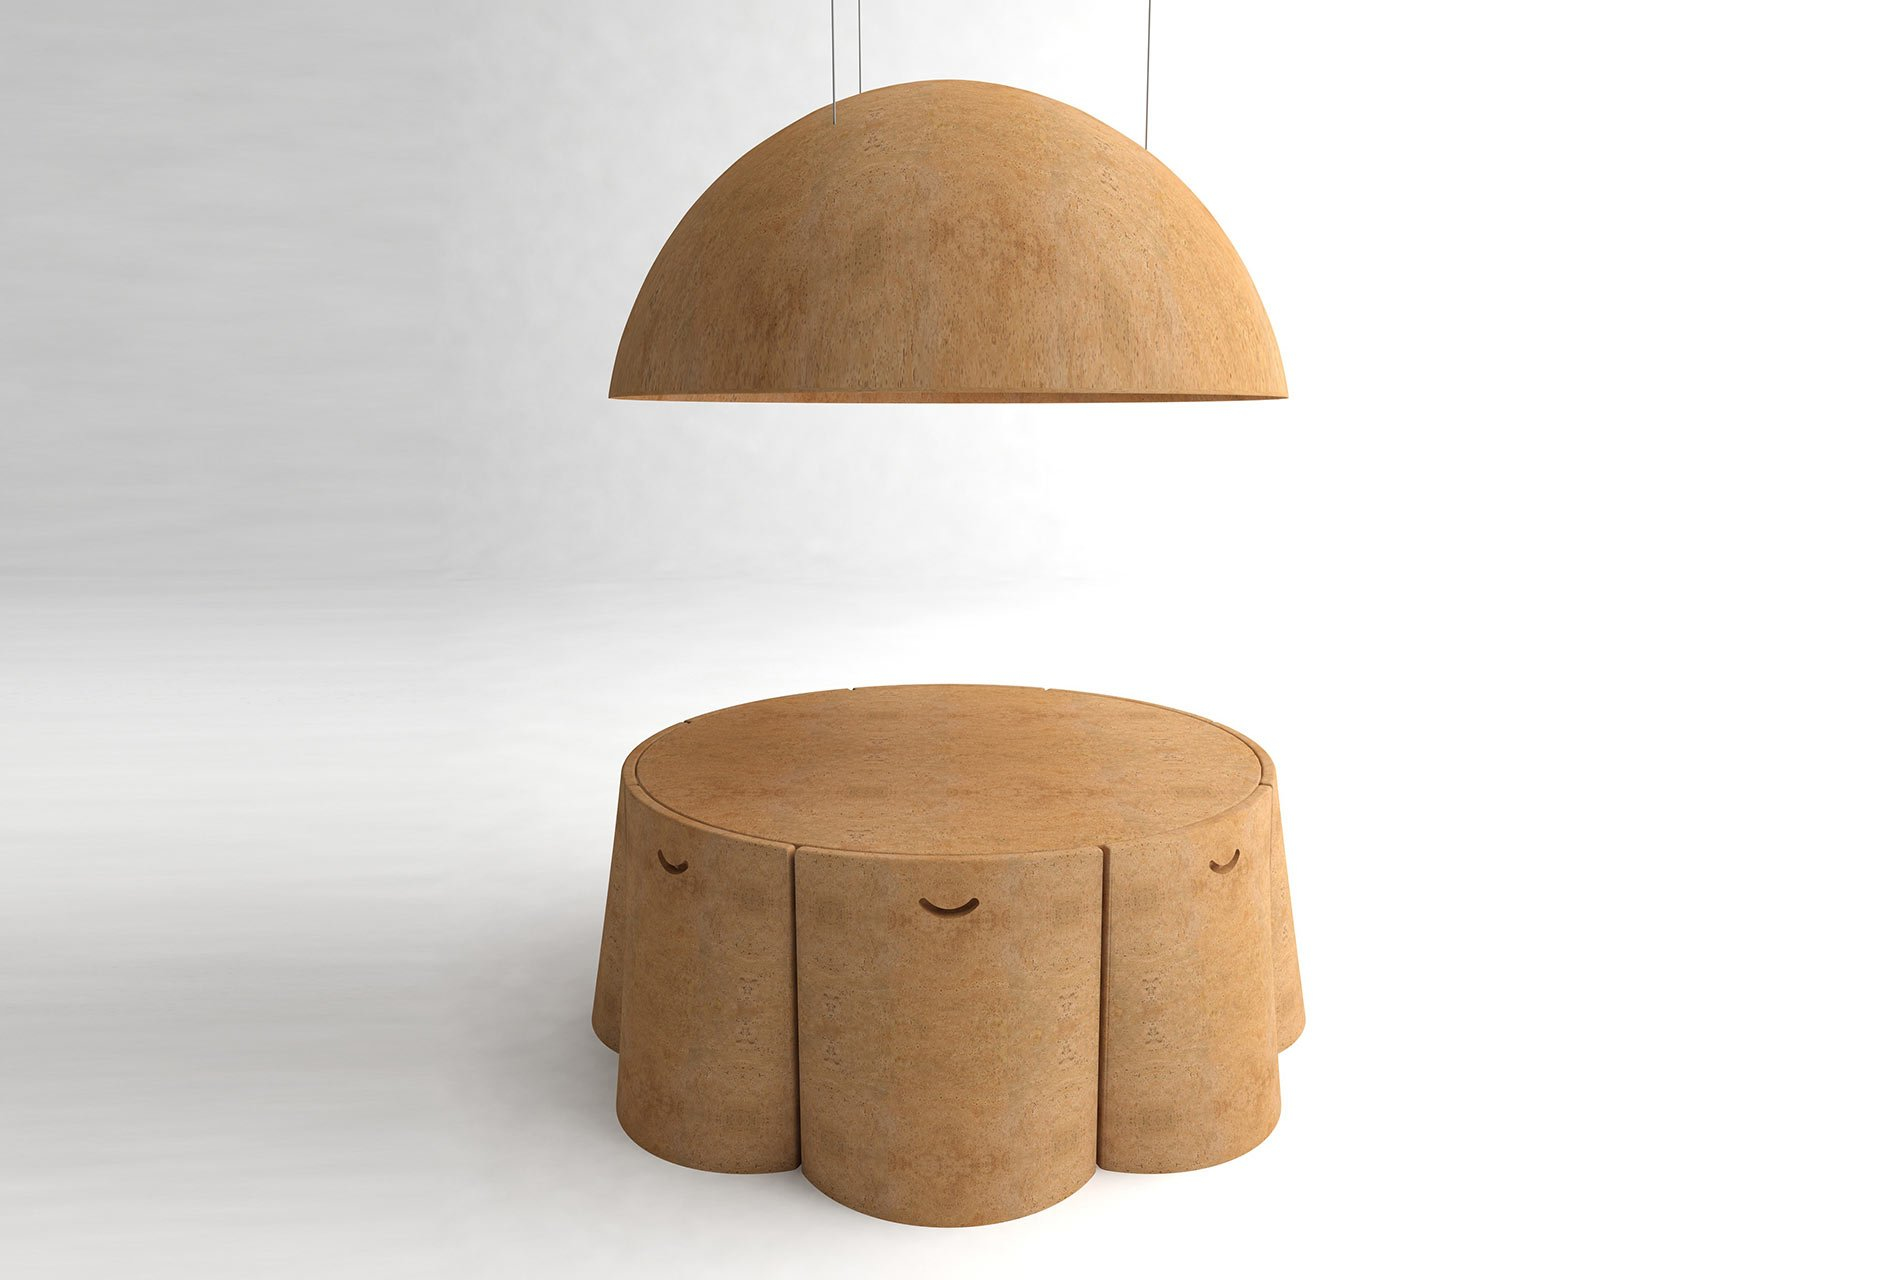 Sustainable Cork Furniture For Eco conscious Living